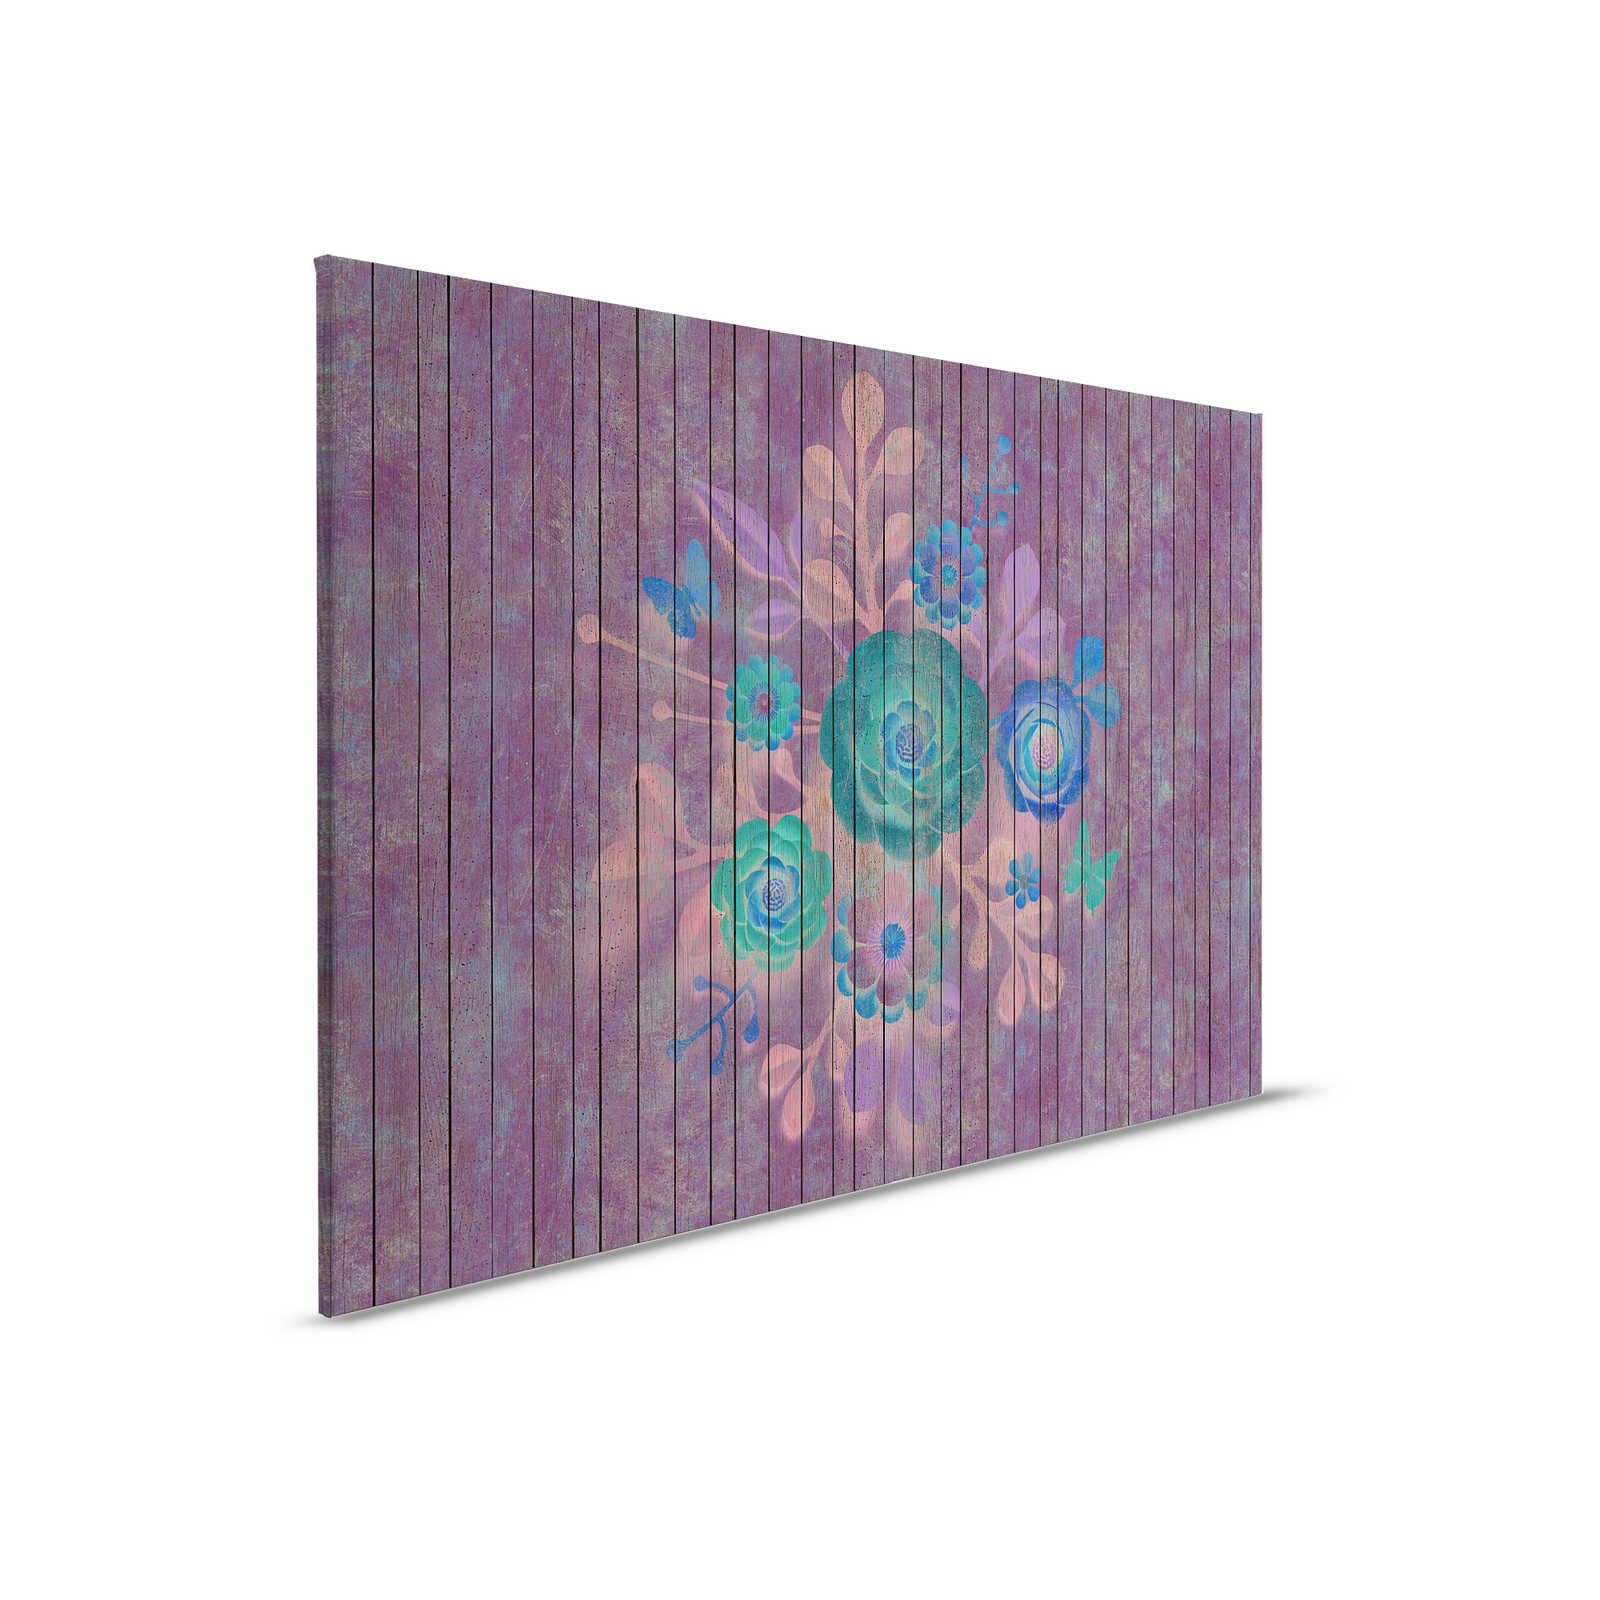 Spray bouquet 1 - Canvas painting with flowers on board wall - Wooden panels wide - 0.90 m x 0.60 m
